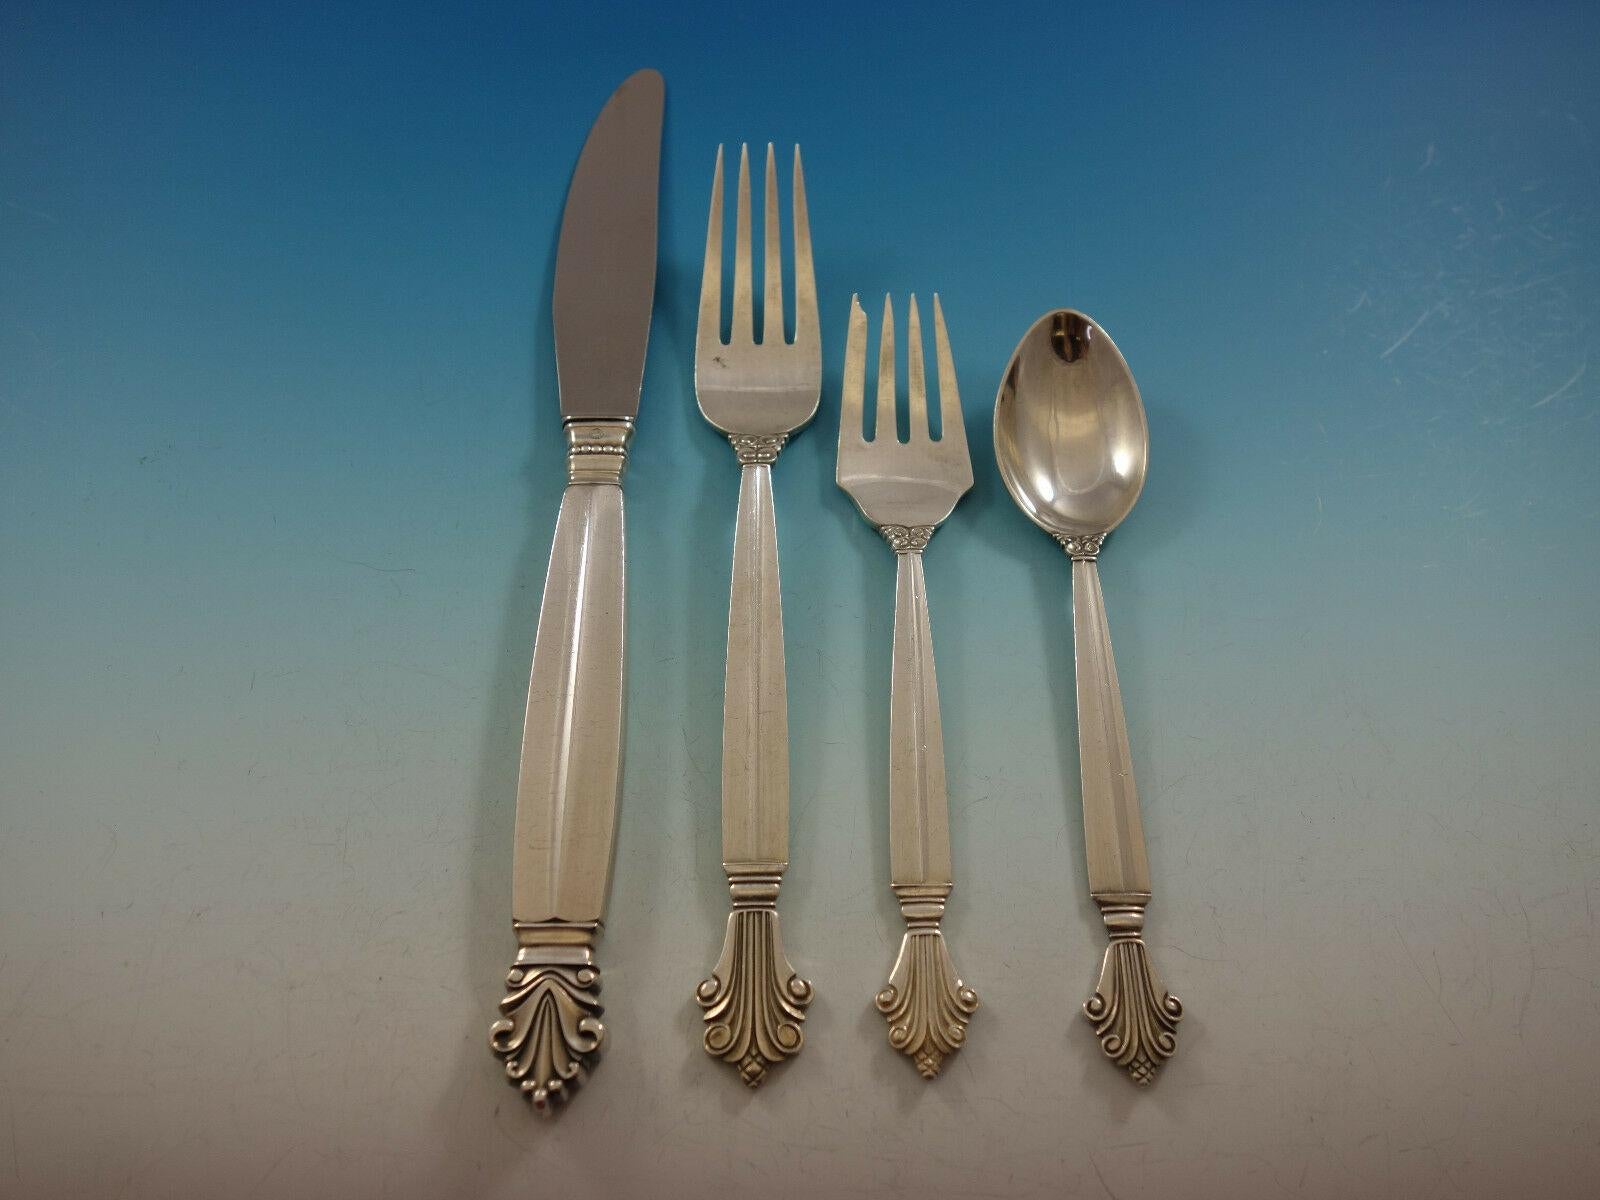 Exquisite Acanthus by Georg Jensen sterling silver dinner size flatware set - 93 pieces. This set includes:

12 dinner knives, long handle, 9